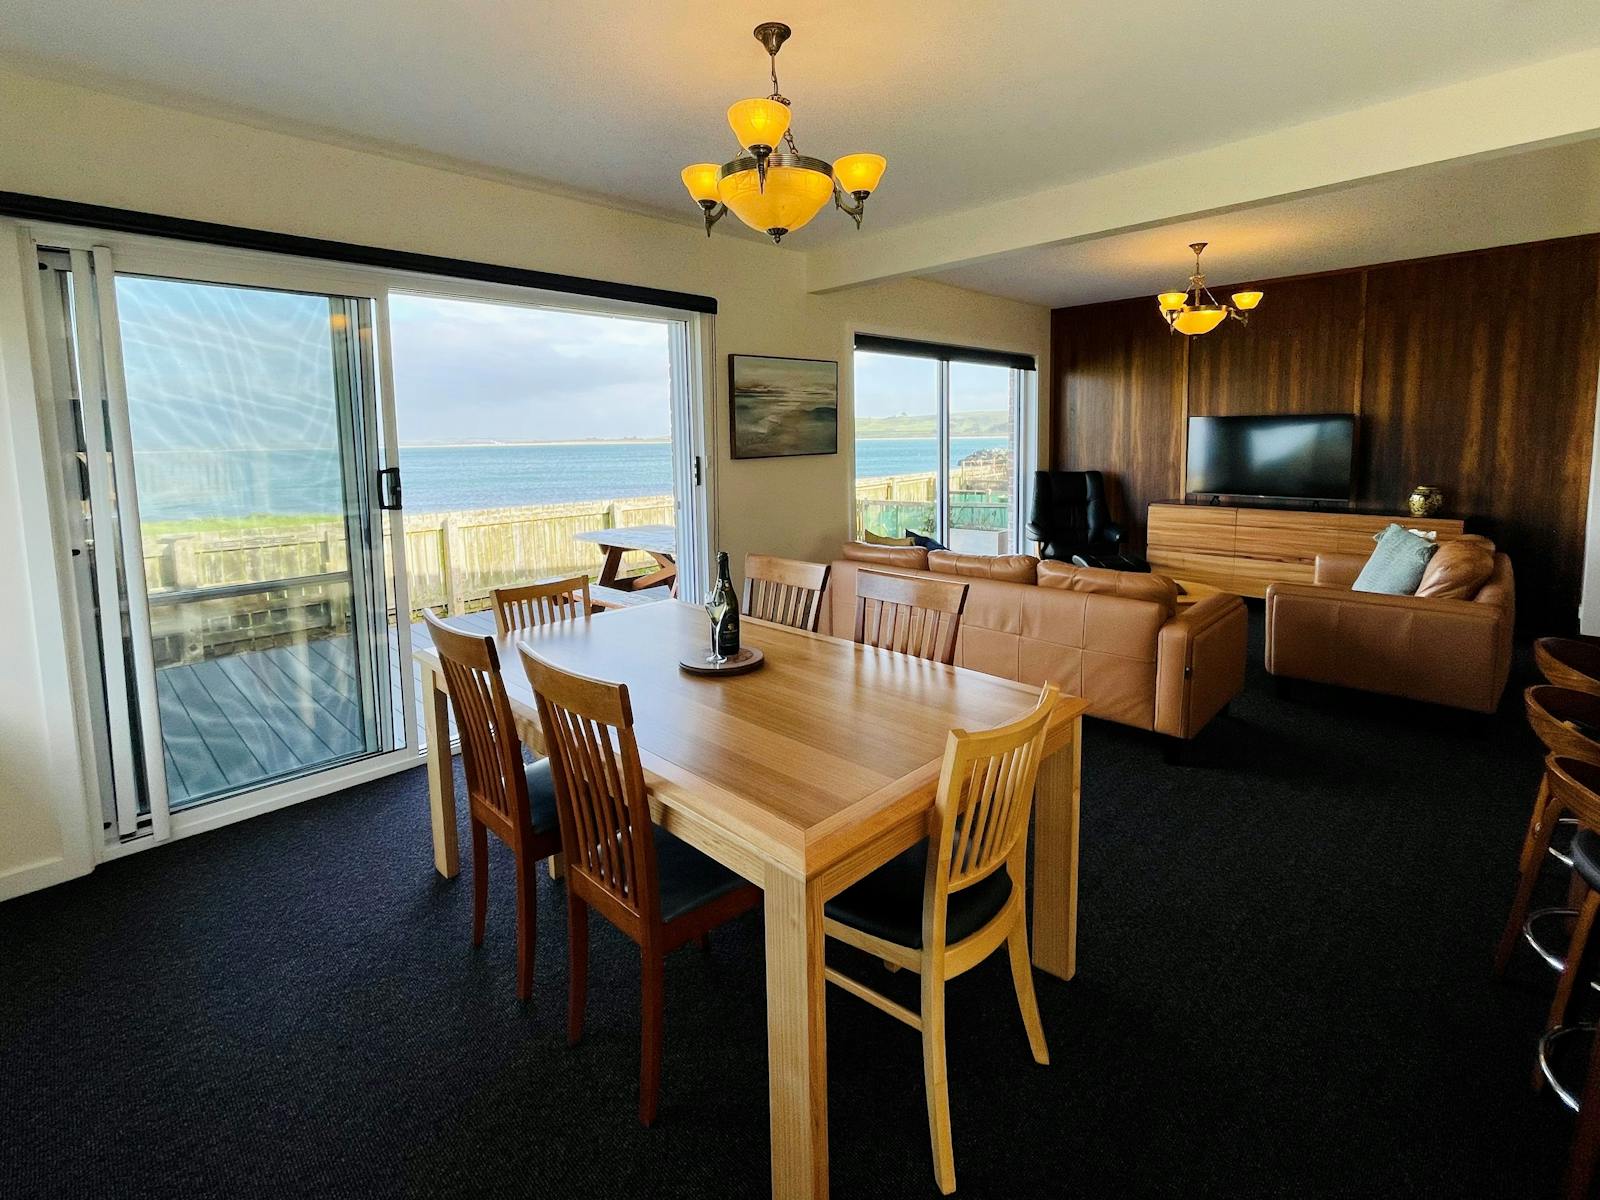 Open plan kitchen, dining, lounge - you can't get any closer to the water at Stanley Village